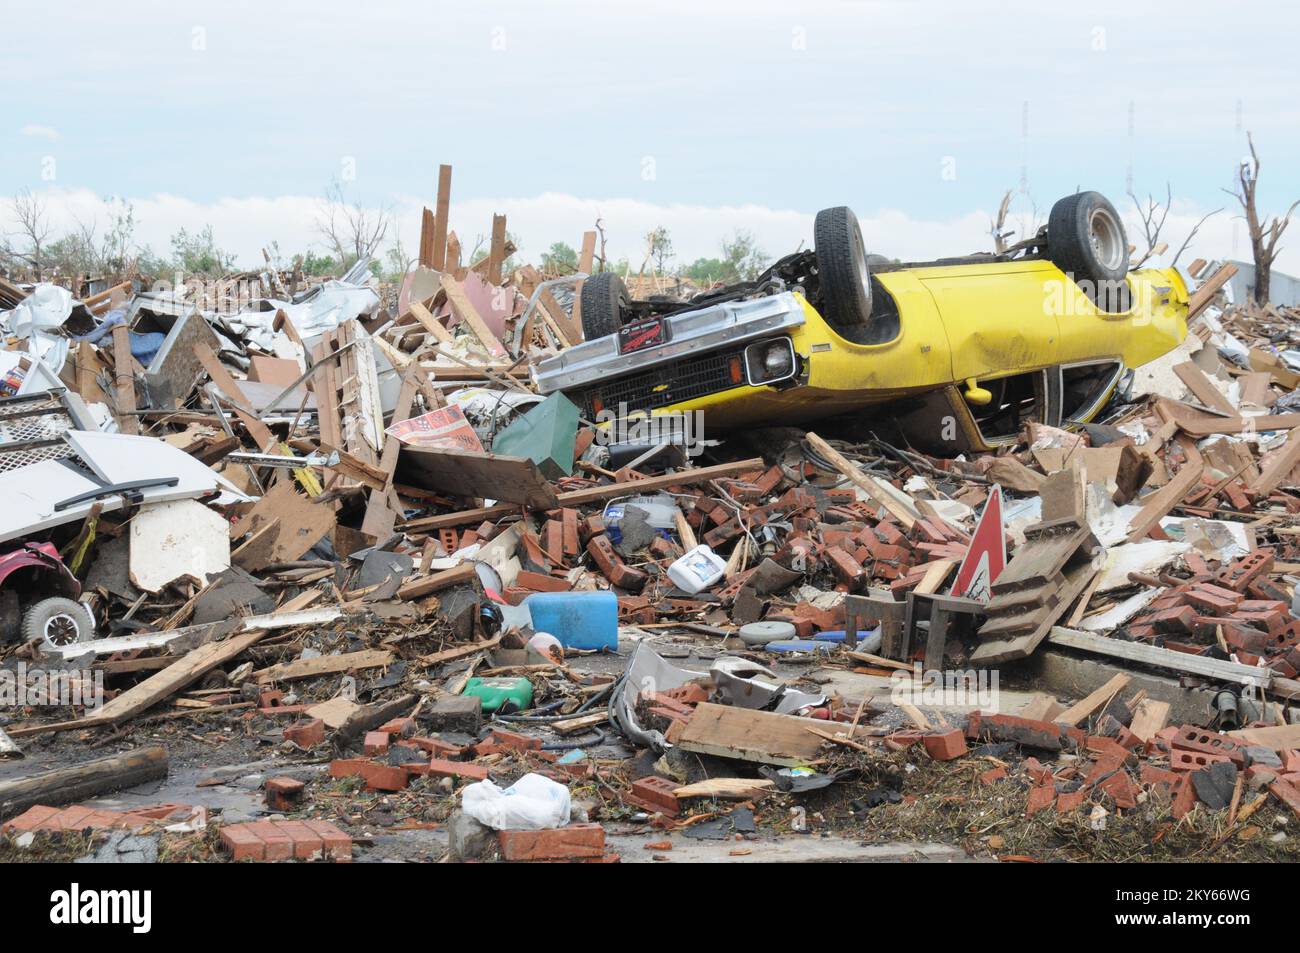 Damage and Debris after EF-5 Tornado.. Photographs Relating to Disasters and Emergency Management Programs, Activities, and Officials Stock Photo